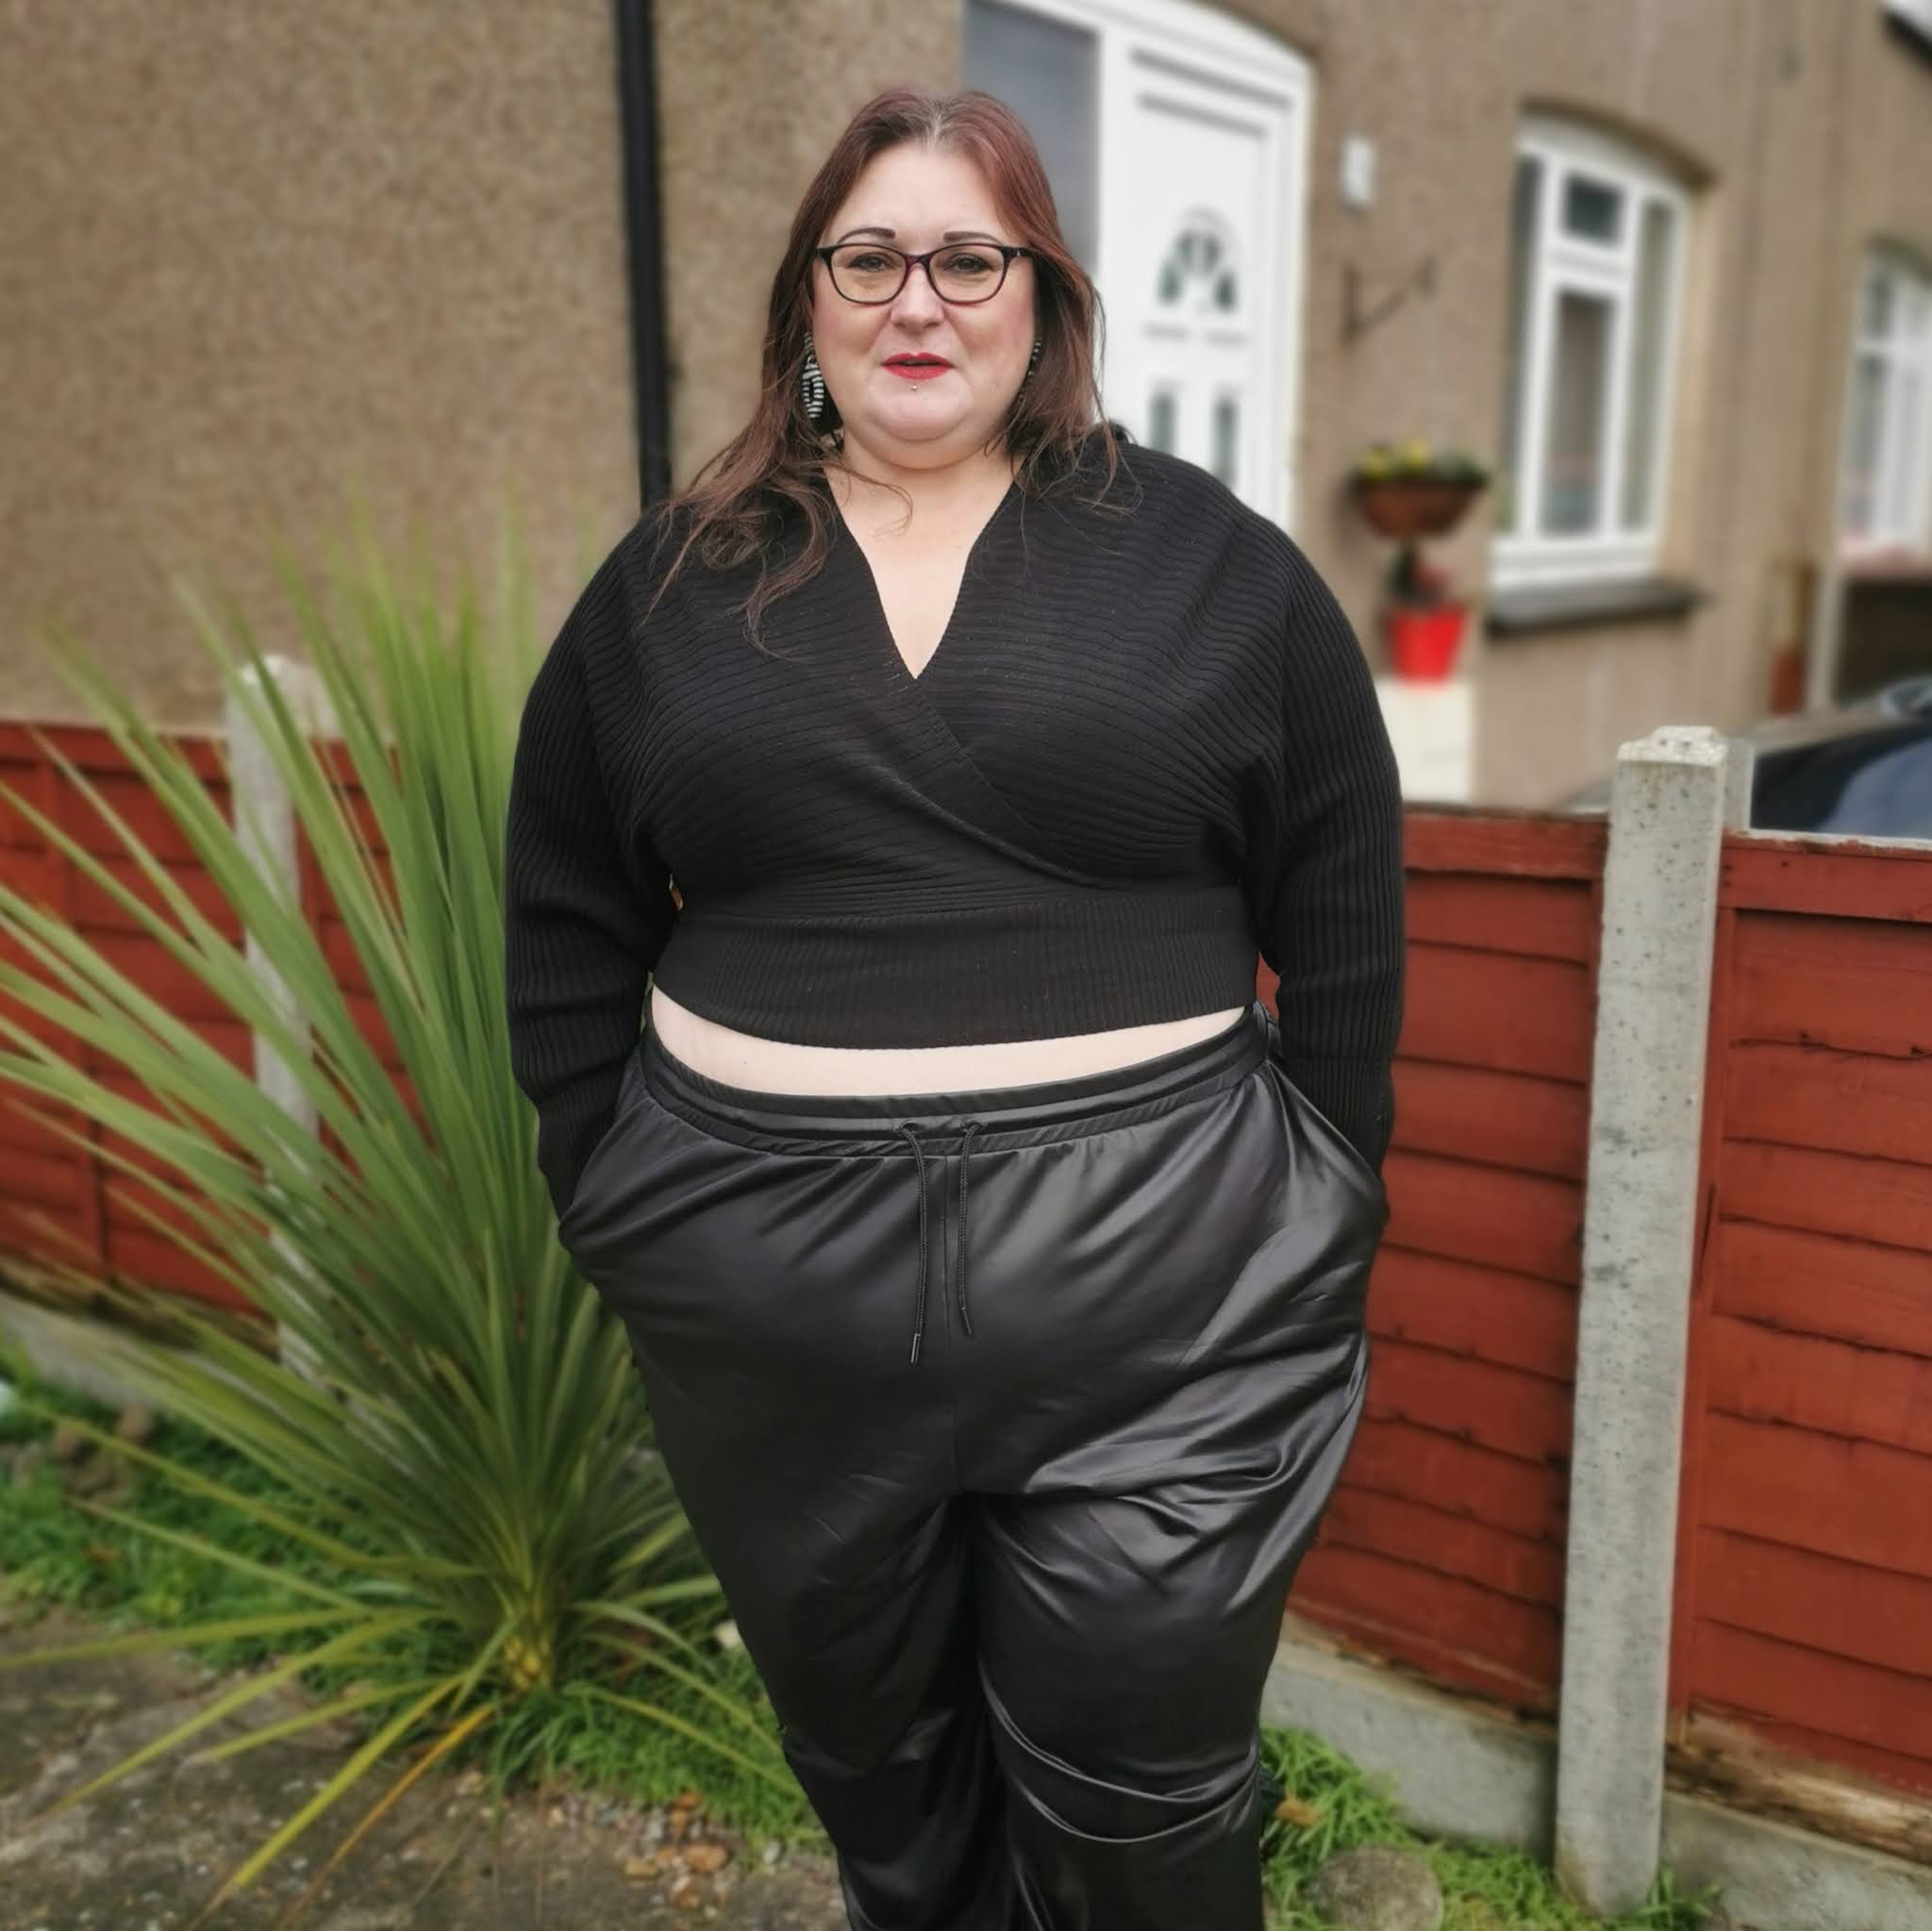 Pretty Little Thing Plus Size Range - The Fashion Brand That is